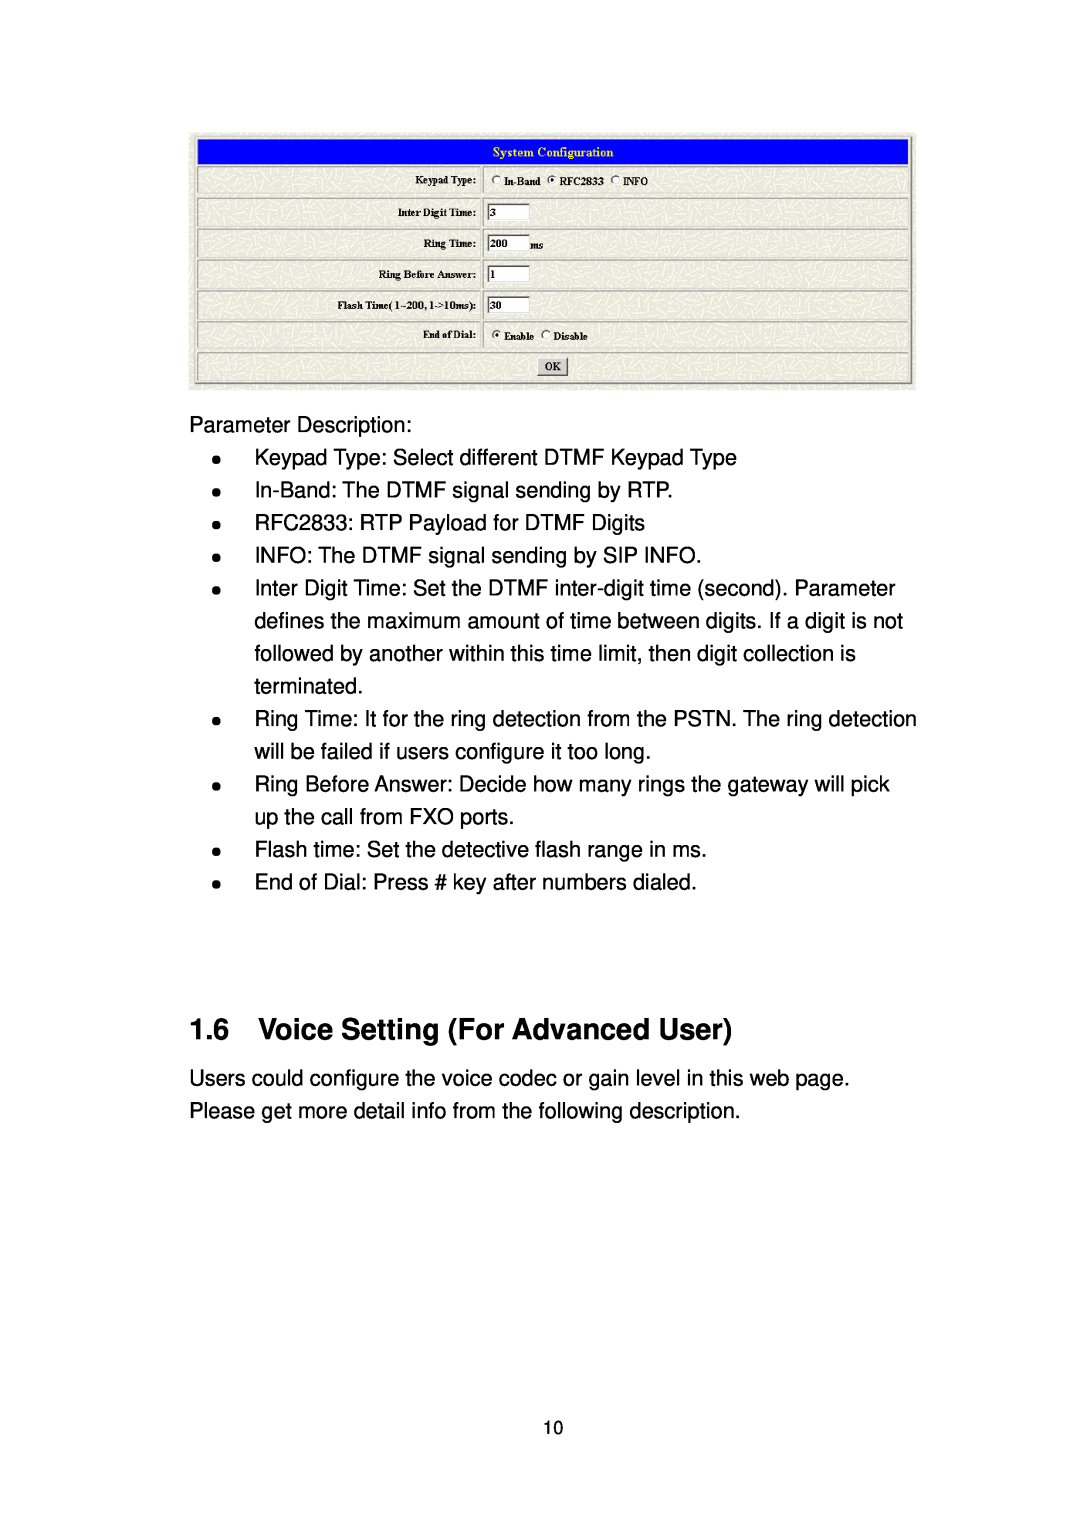 MicroNet Technology SP5054A/S, SP5052A/S user manual Voice Setting For Advanced User 